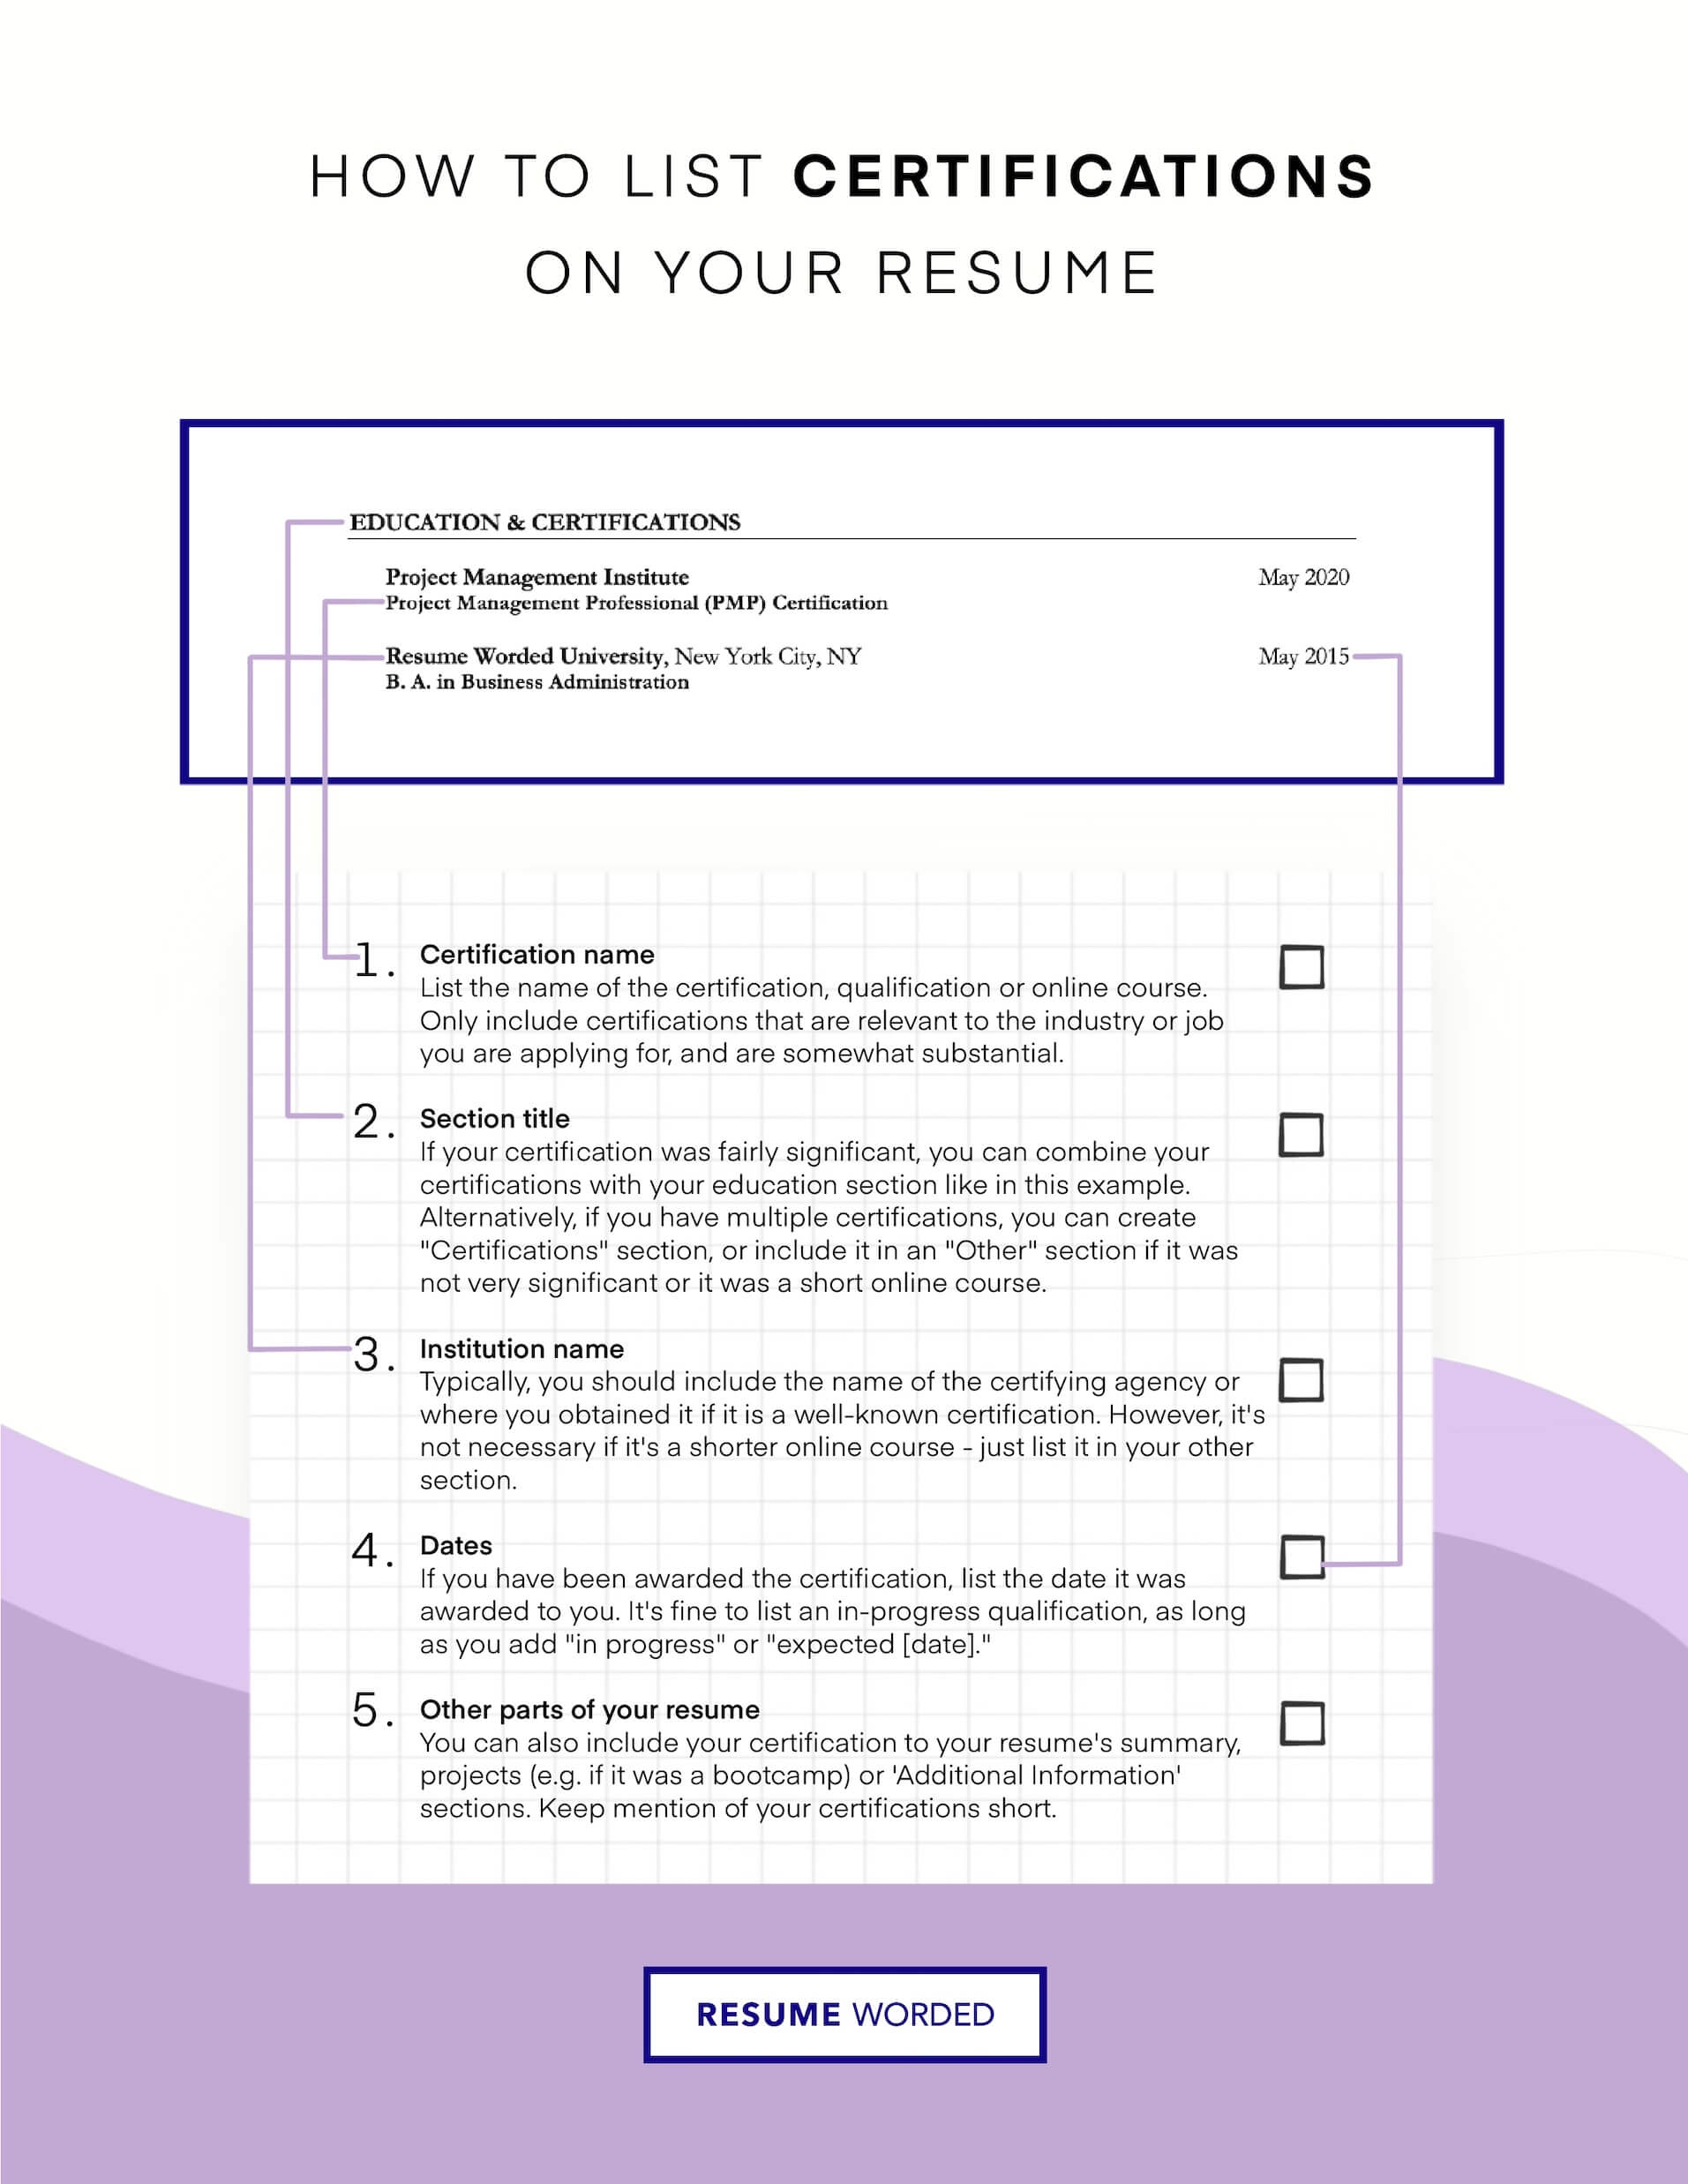 Lists additional qualifications relevant to nursing - General Nurse Resume